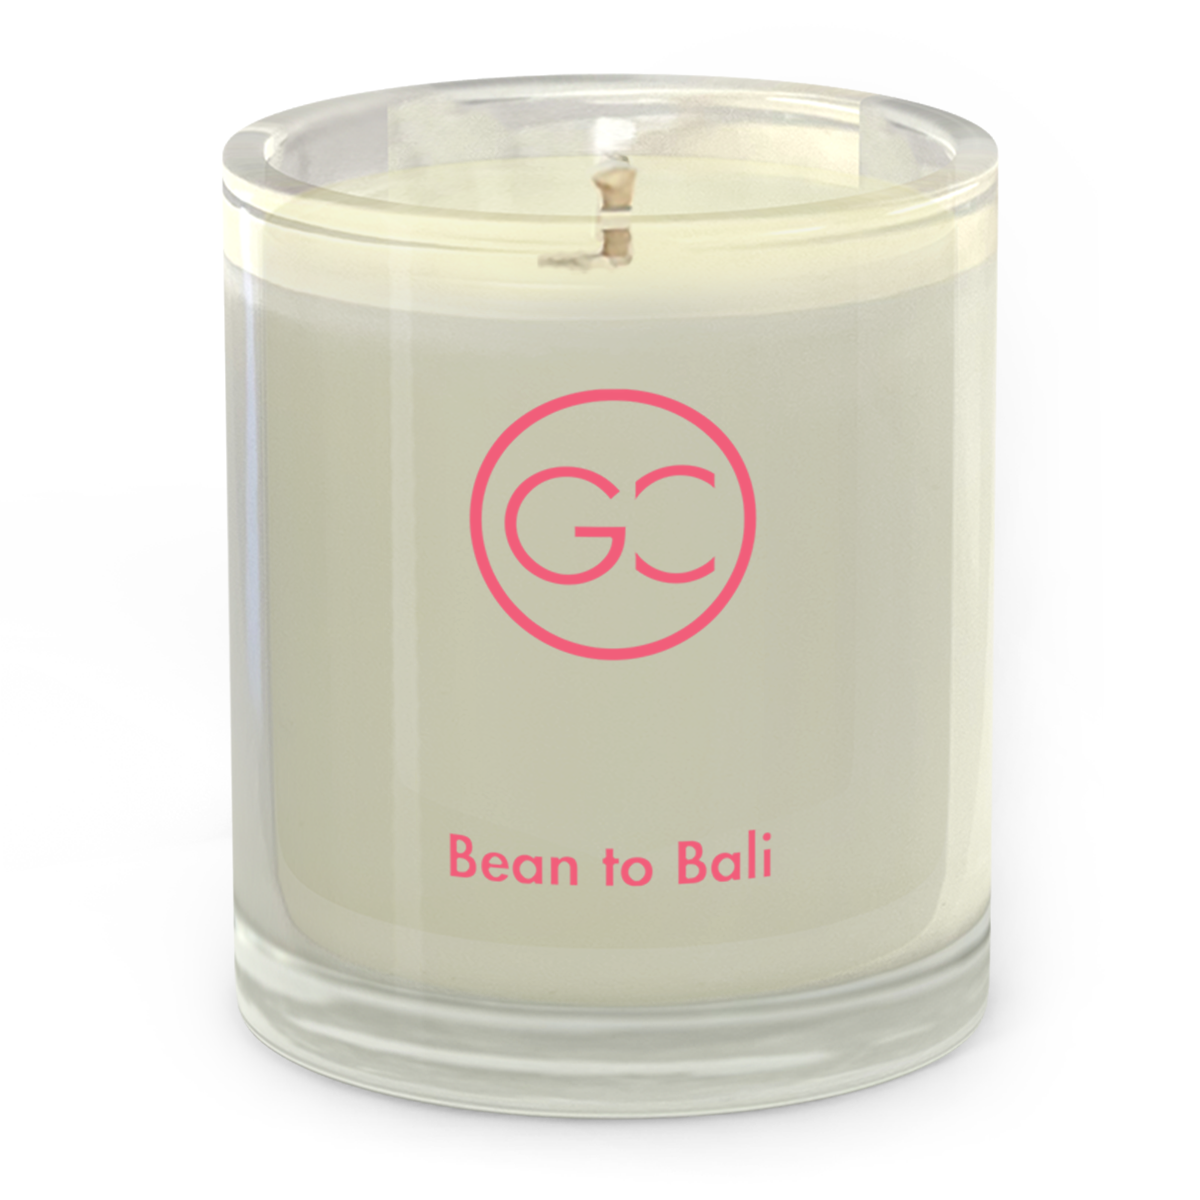 Bean to Bali - Strawberry, Peach &amp; Vanilla Scented Soy Candle 55hr Burn